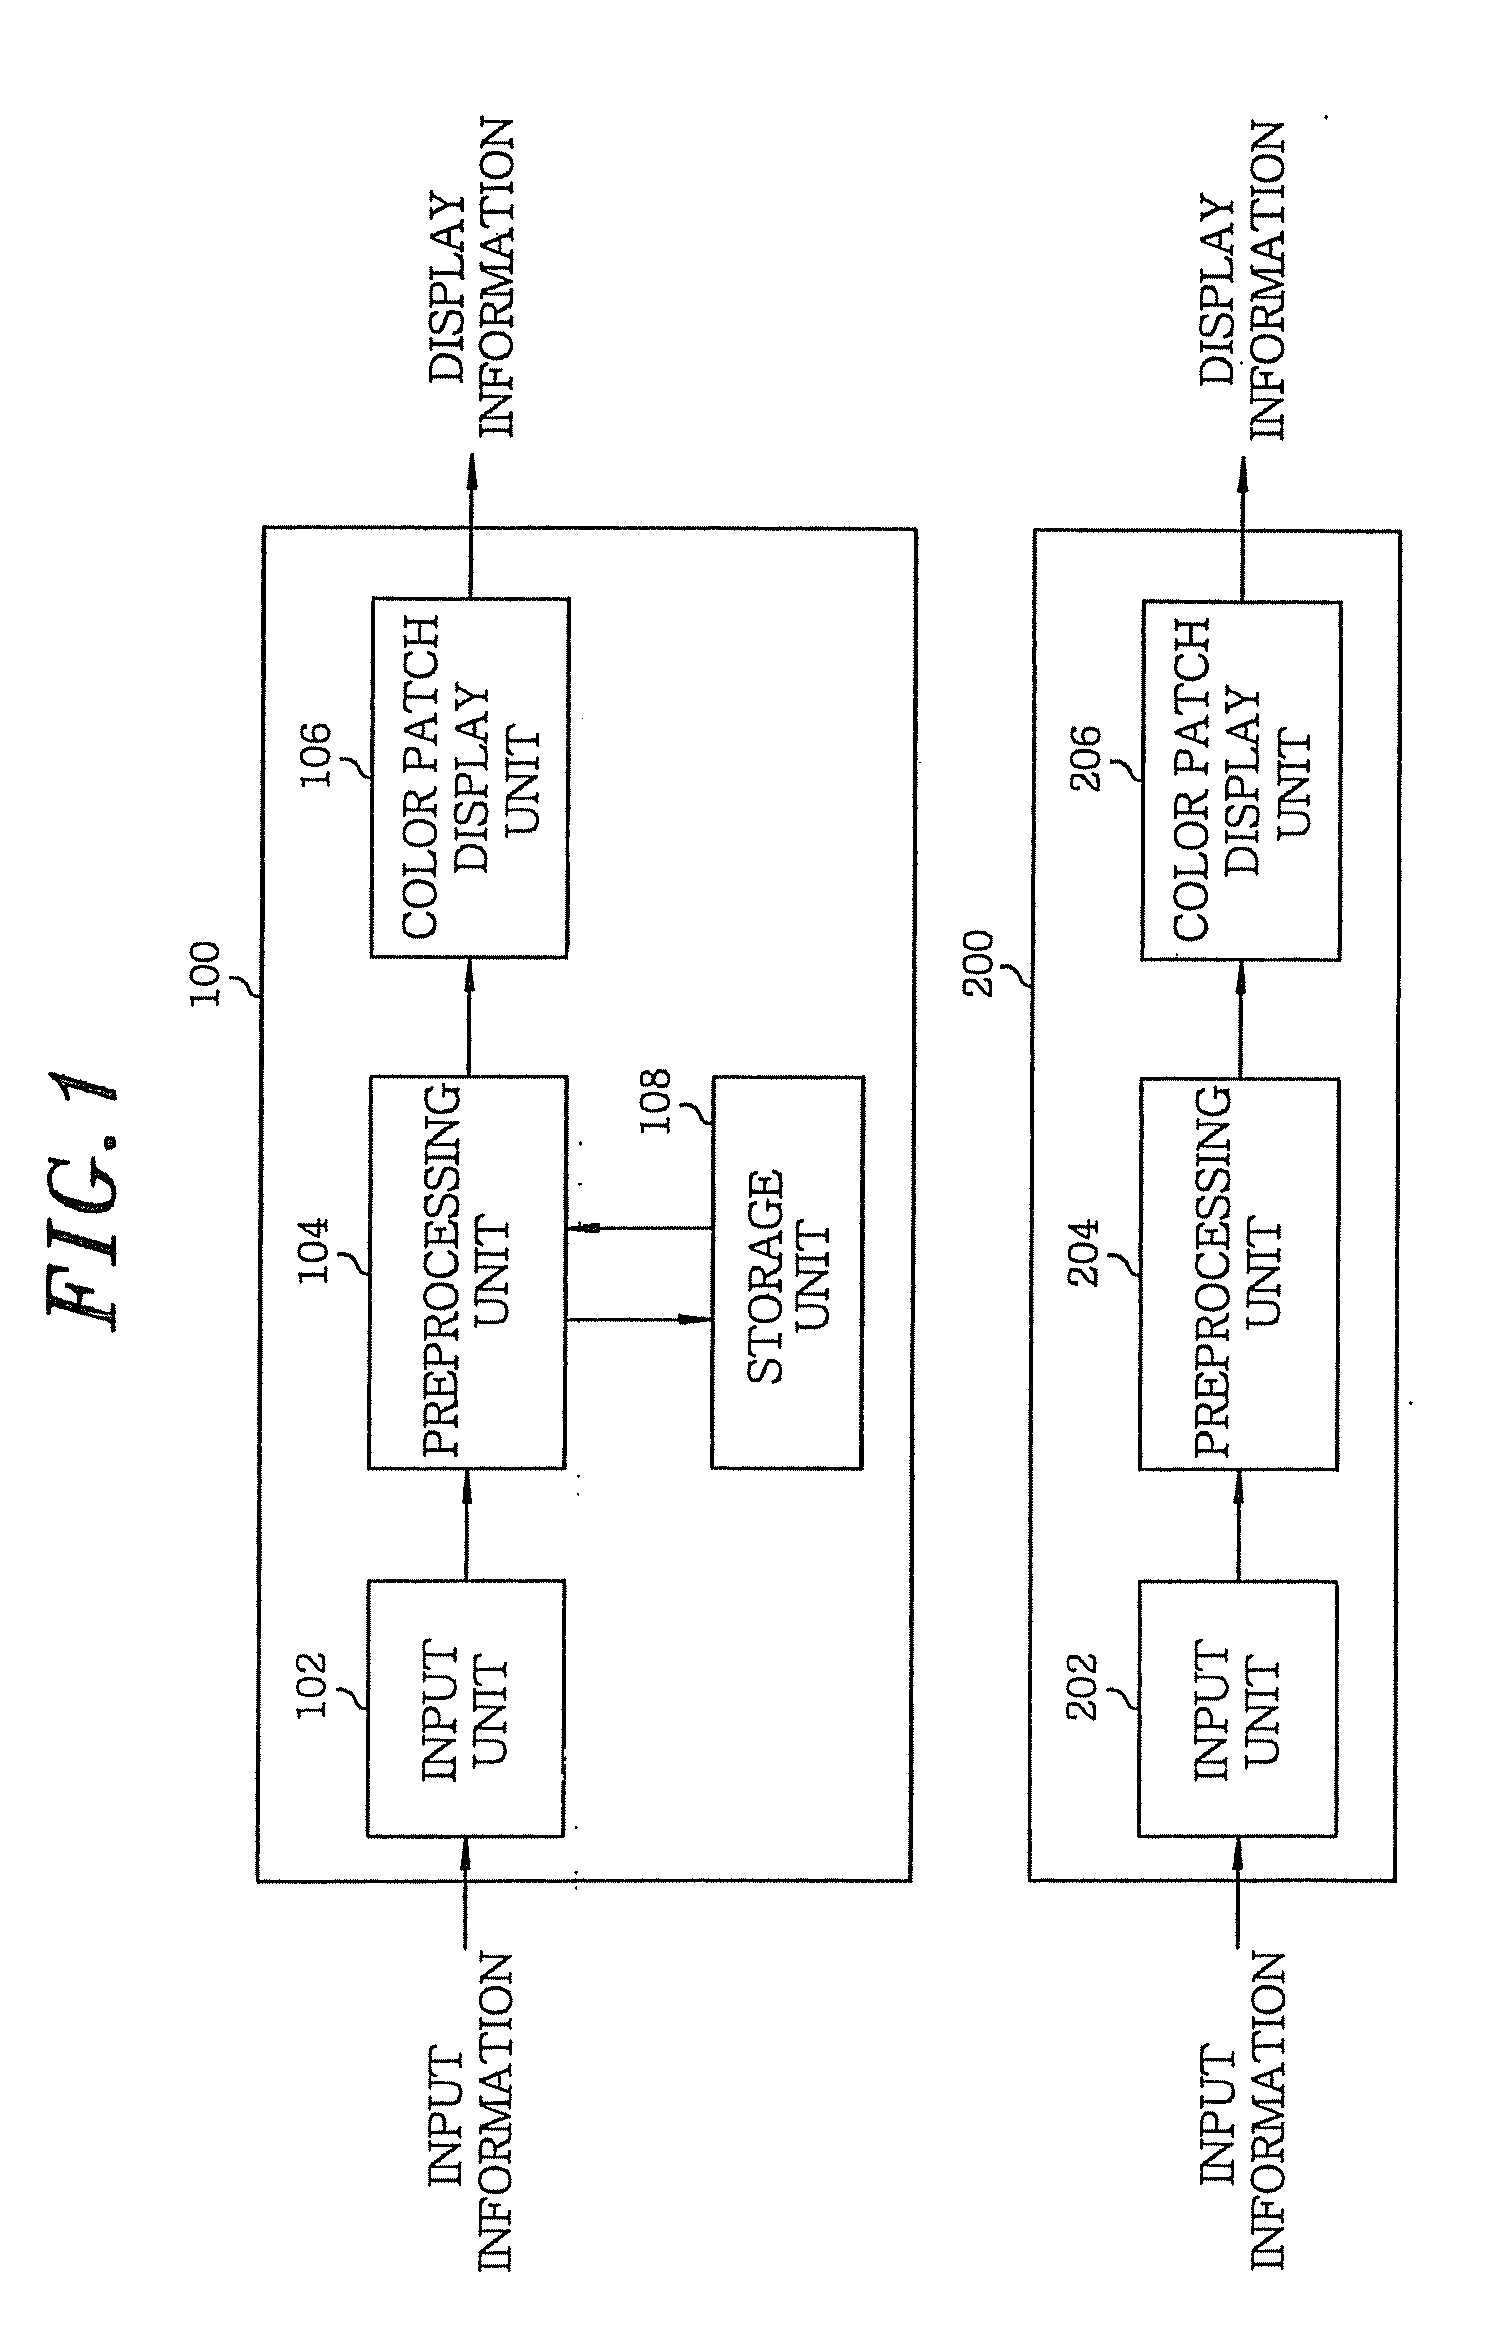 Apparatus and method for providing display information for color calibration of display device